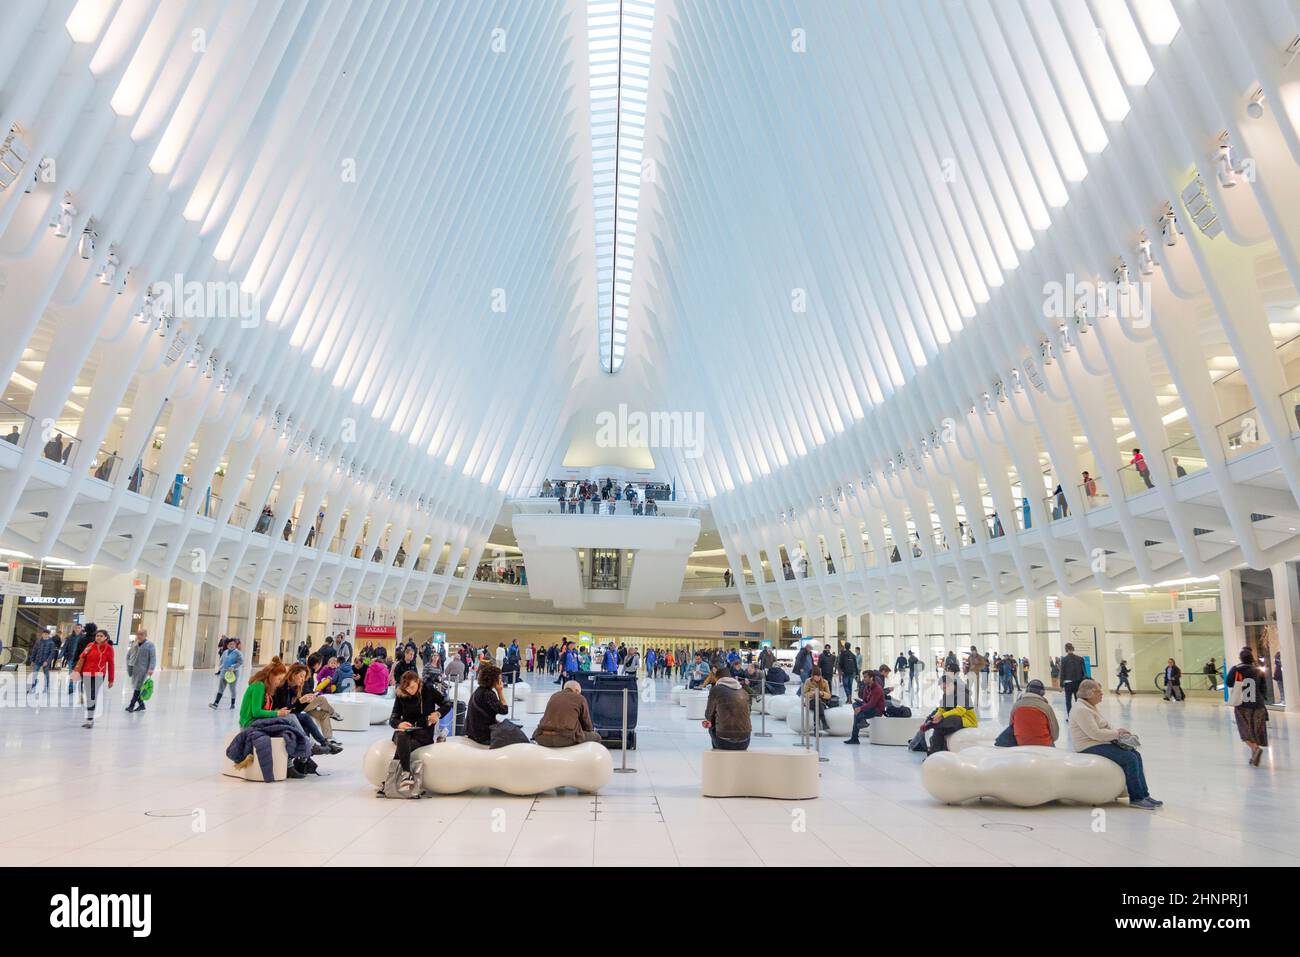 THE OCULUS. The Oculus Transportation Hub at new World Trade Center NYC Subway Station. Oculus, the main station house interior view. Stock Photo